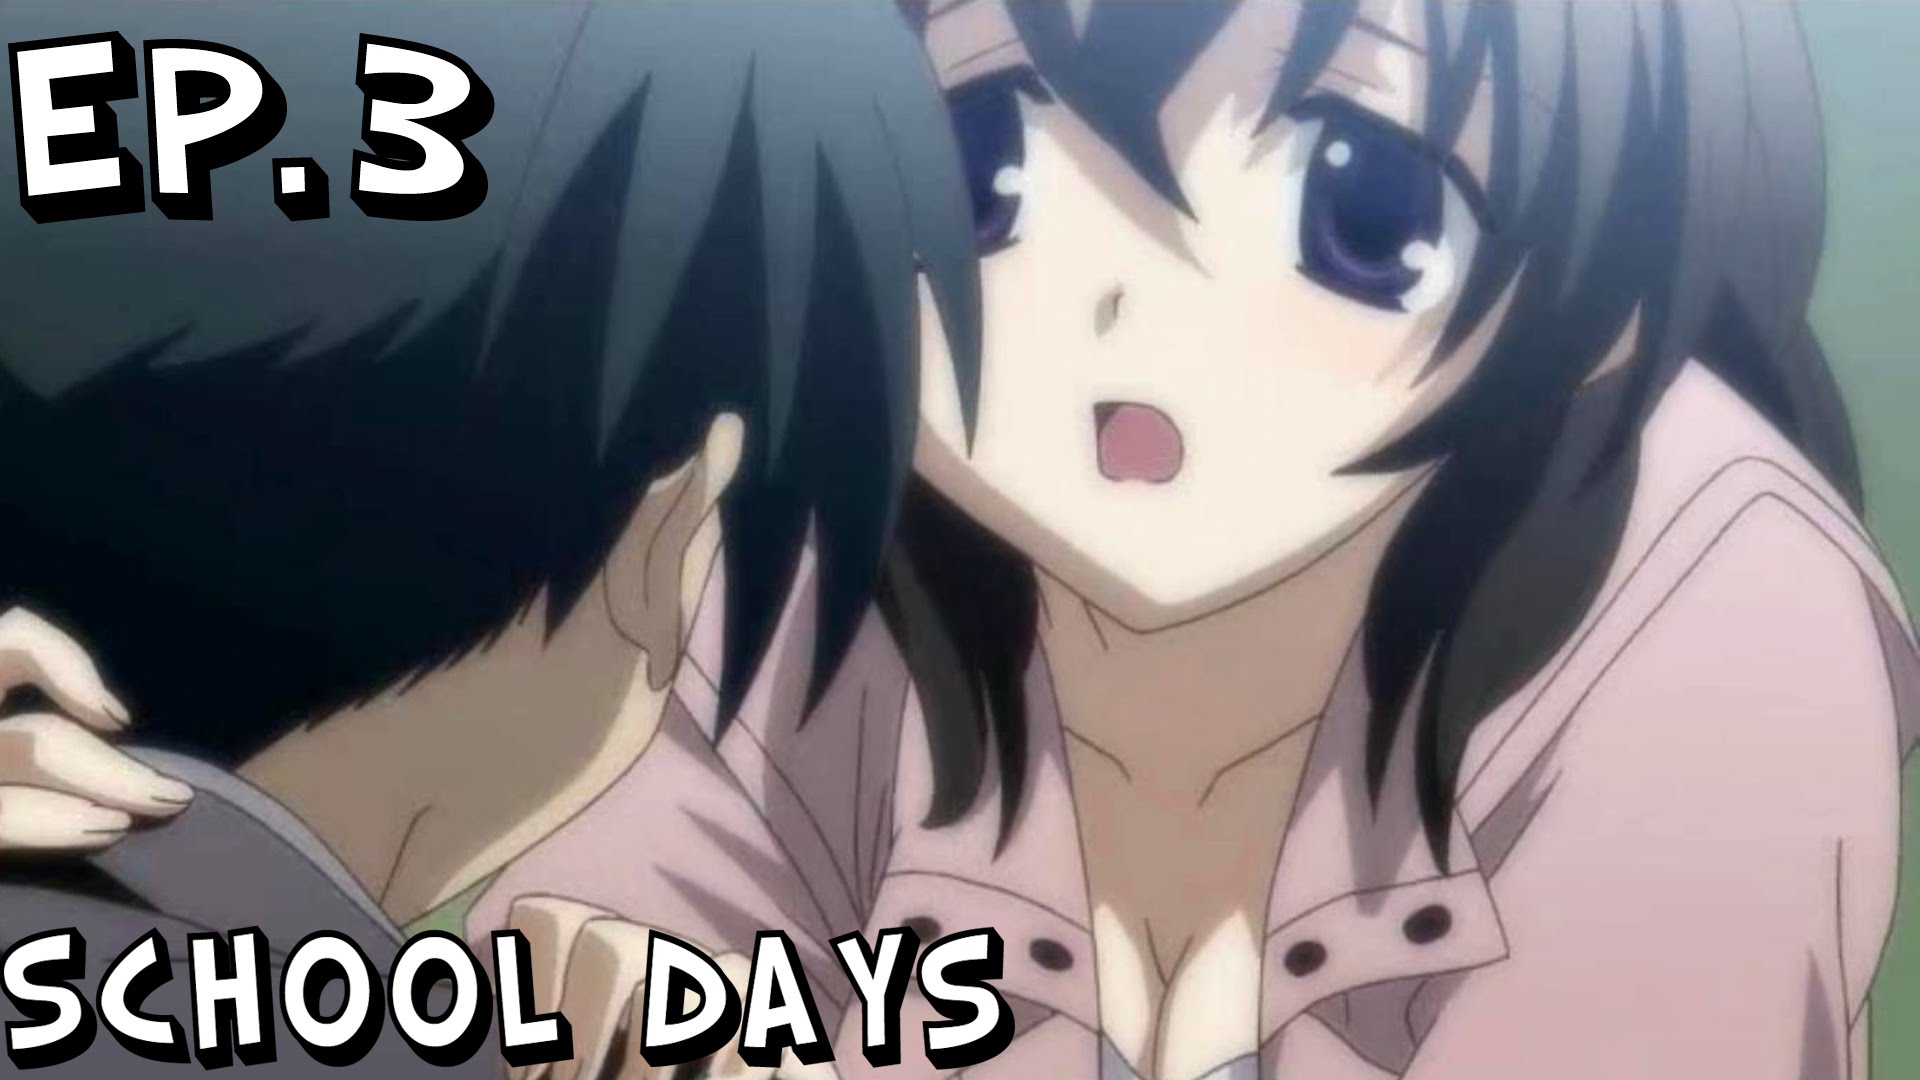 Relationships Revealed | School Days HQ (Ep.3) - YouTube